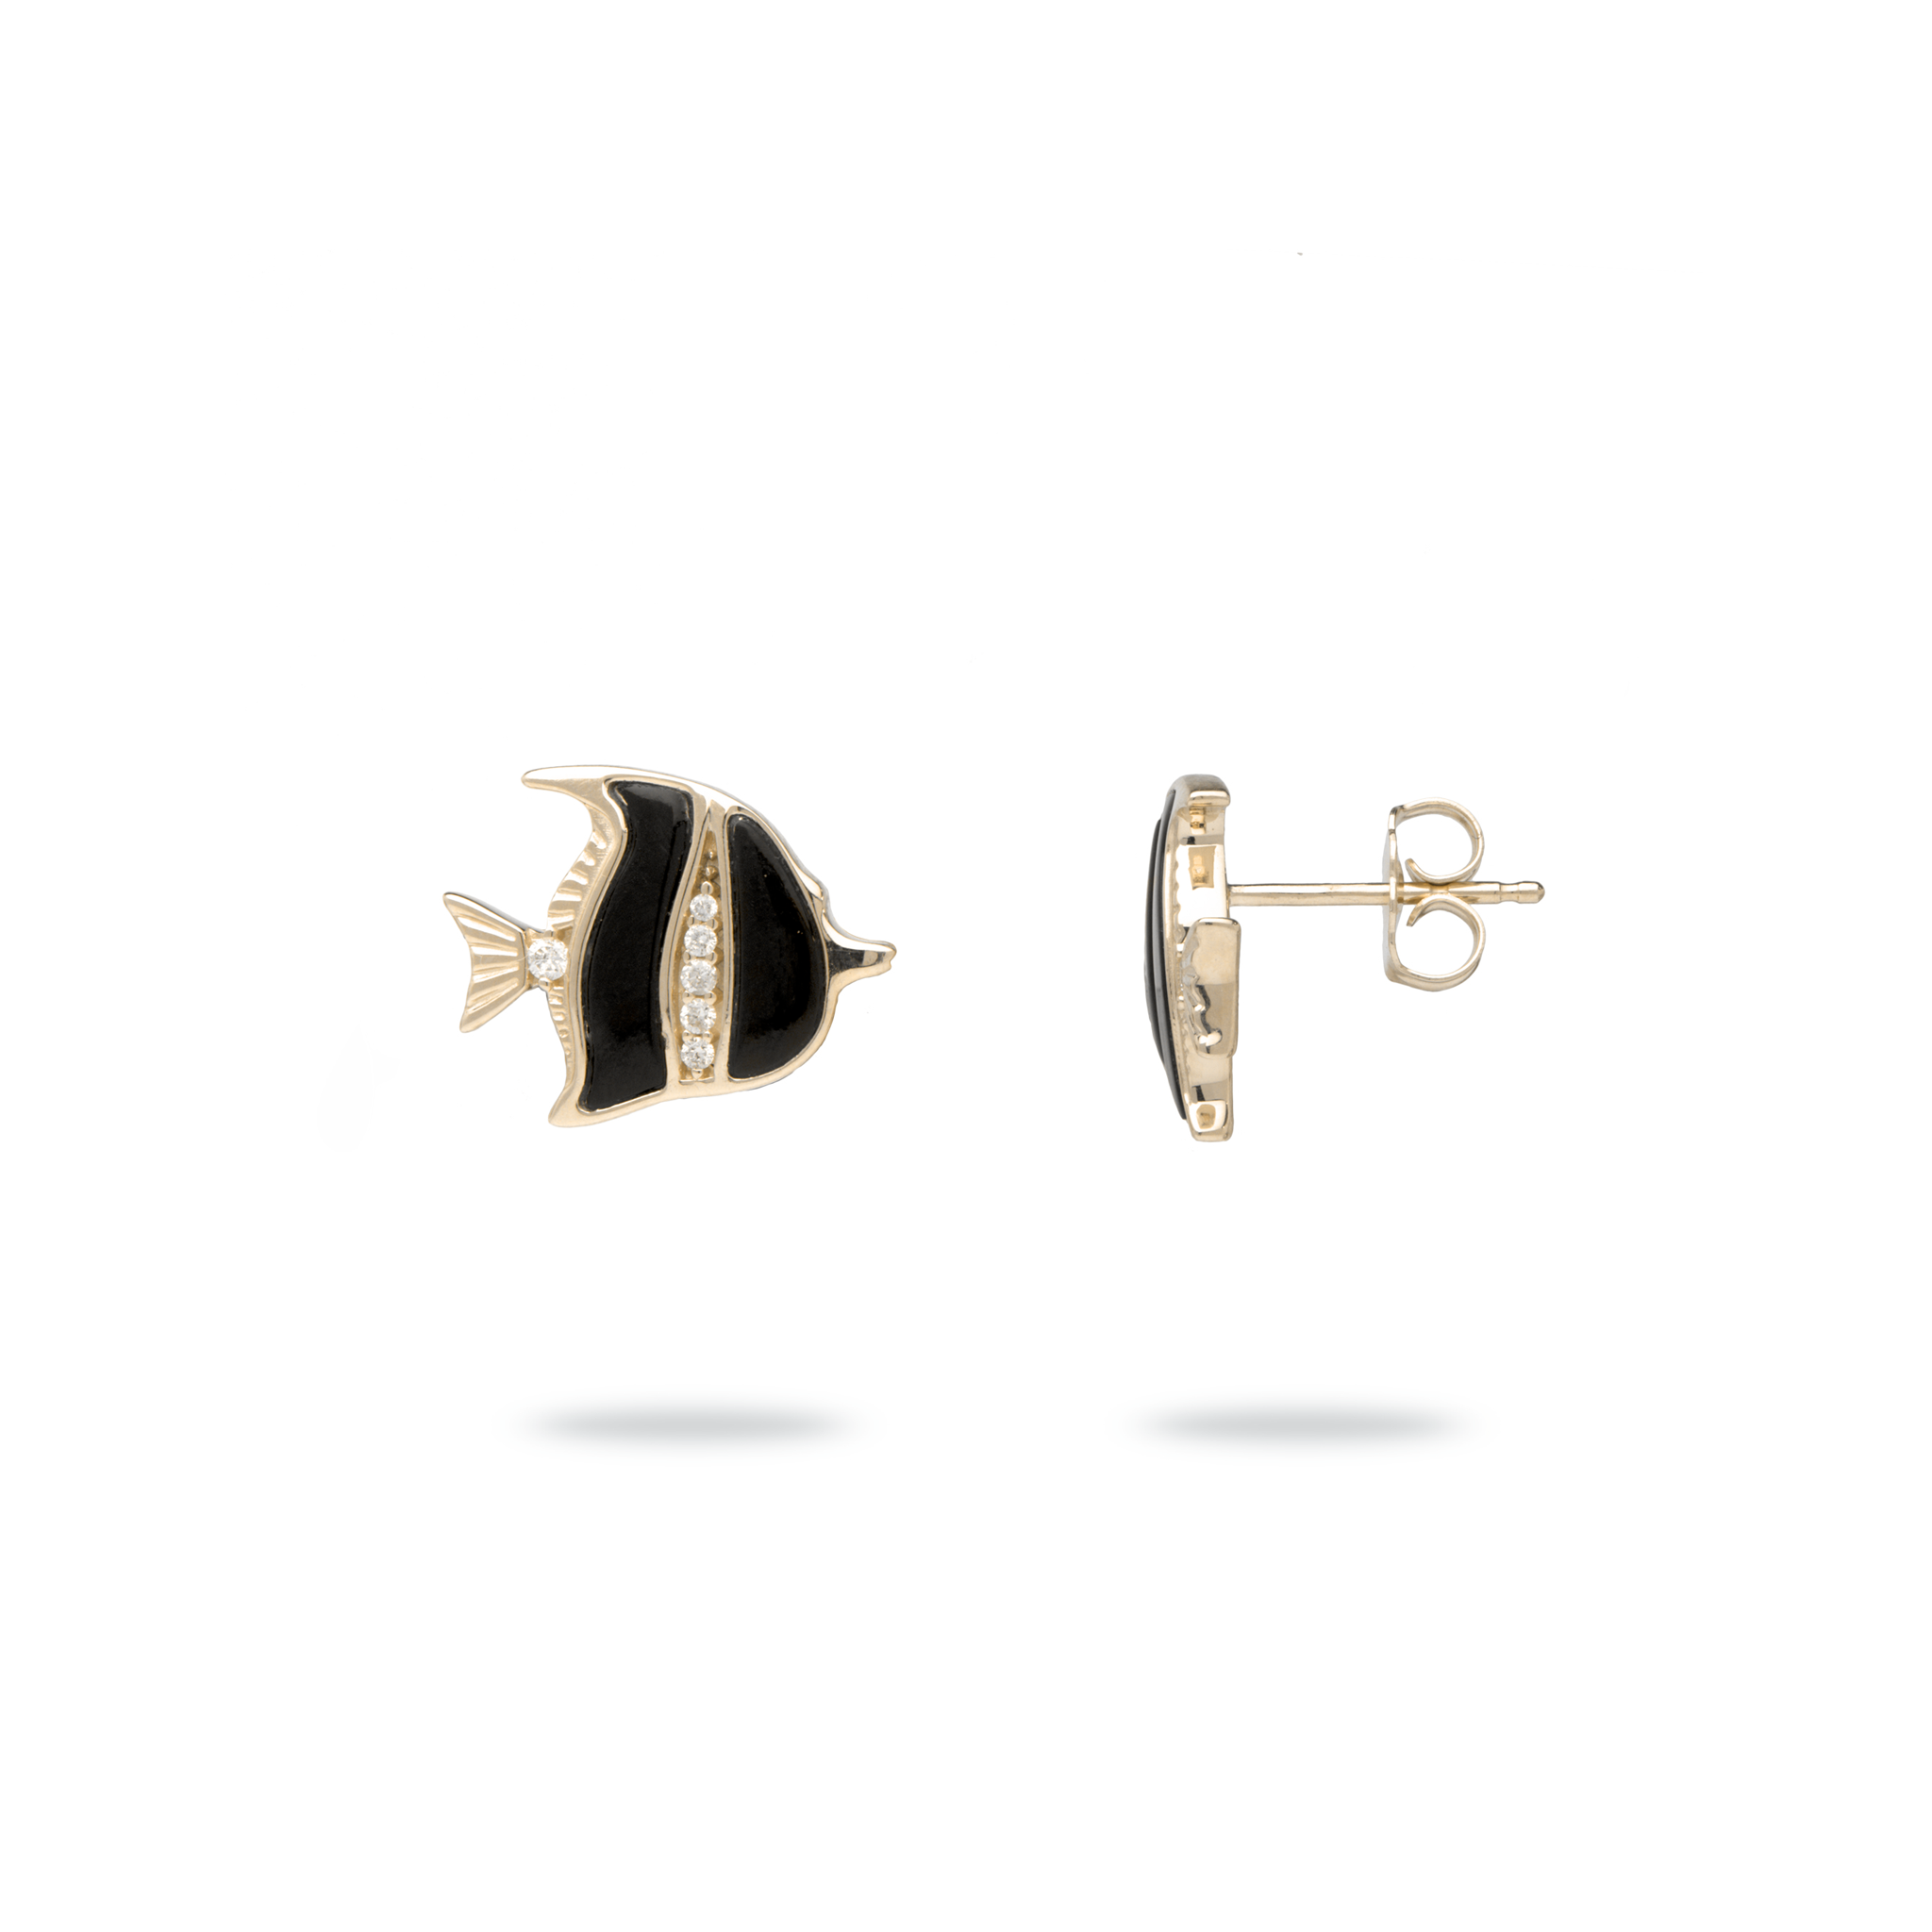 Sealife Angelfish Black Coral Earrings in Gold with Diamonds - 12mm